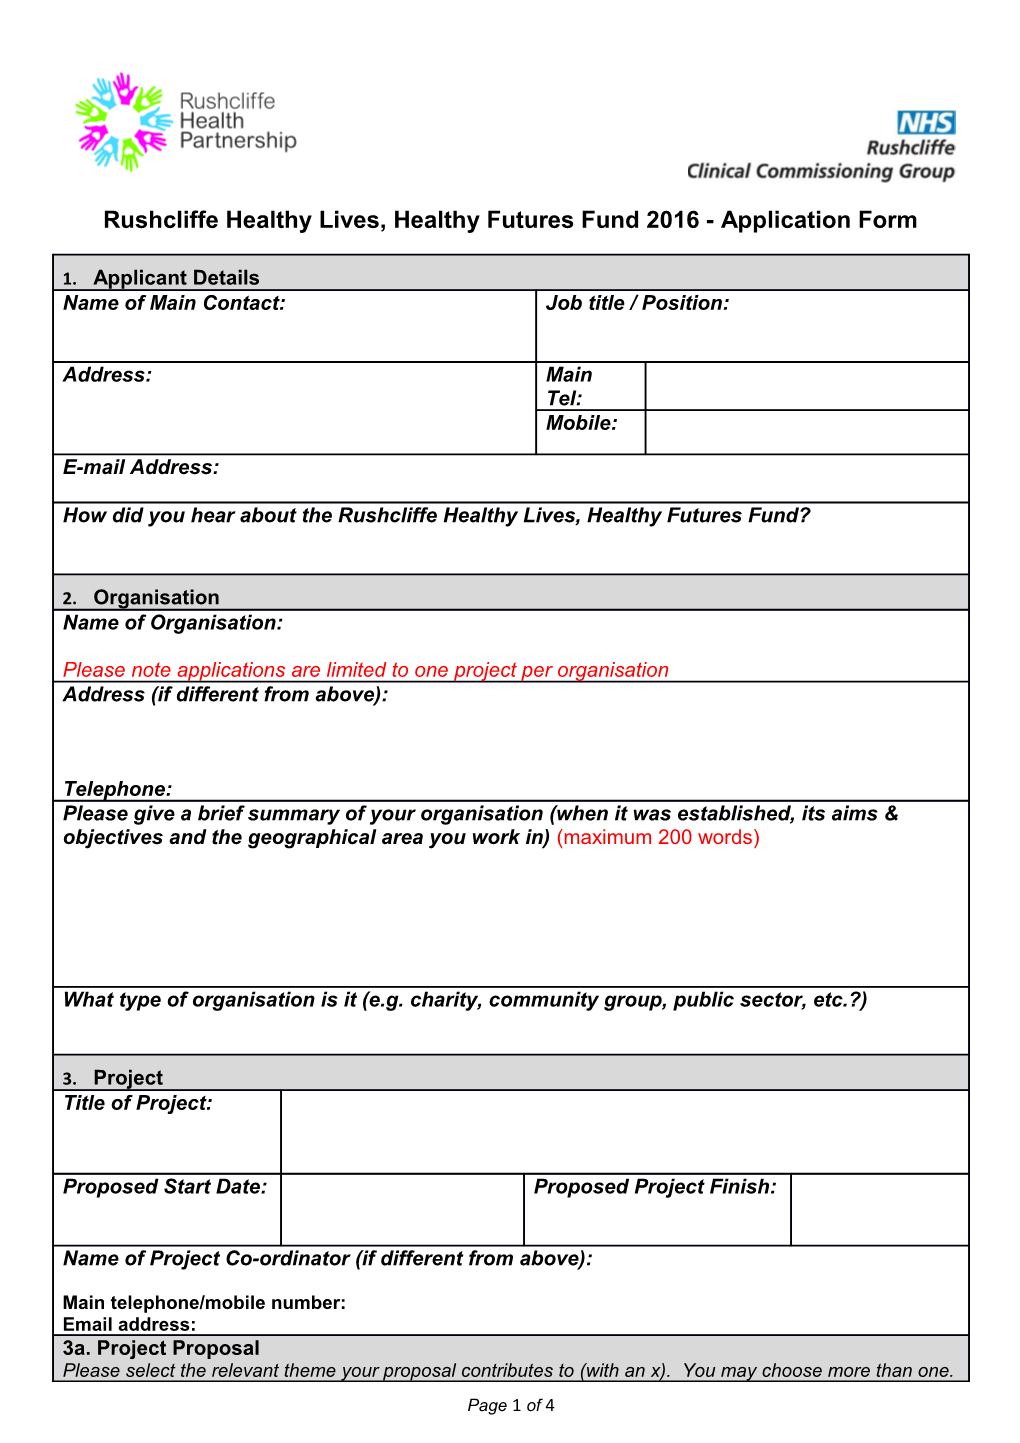 Rushcliffe Healthy Lives, Healthy Futures Fund 2016 - Application Form